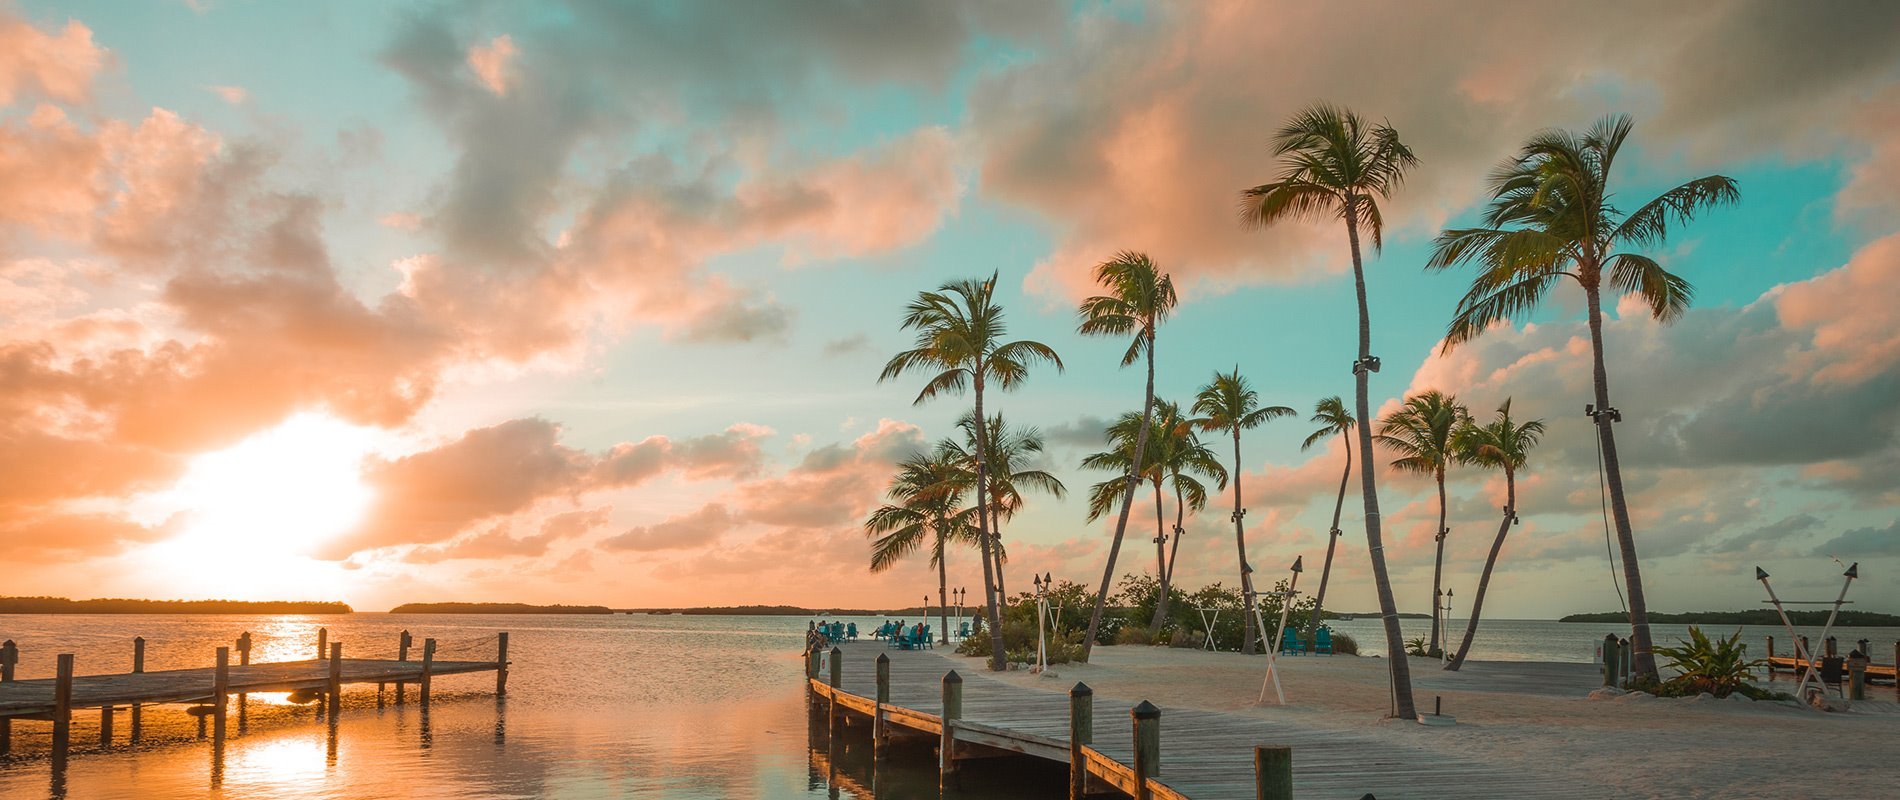 The Best Places To Vacation In Florida